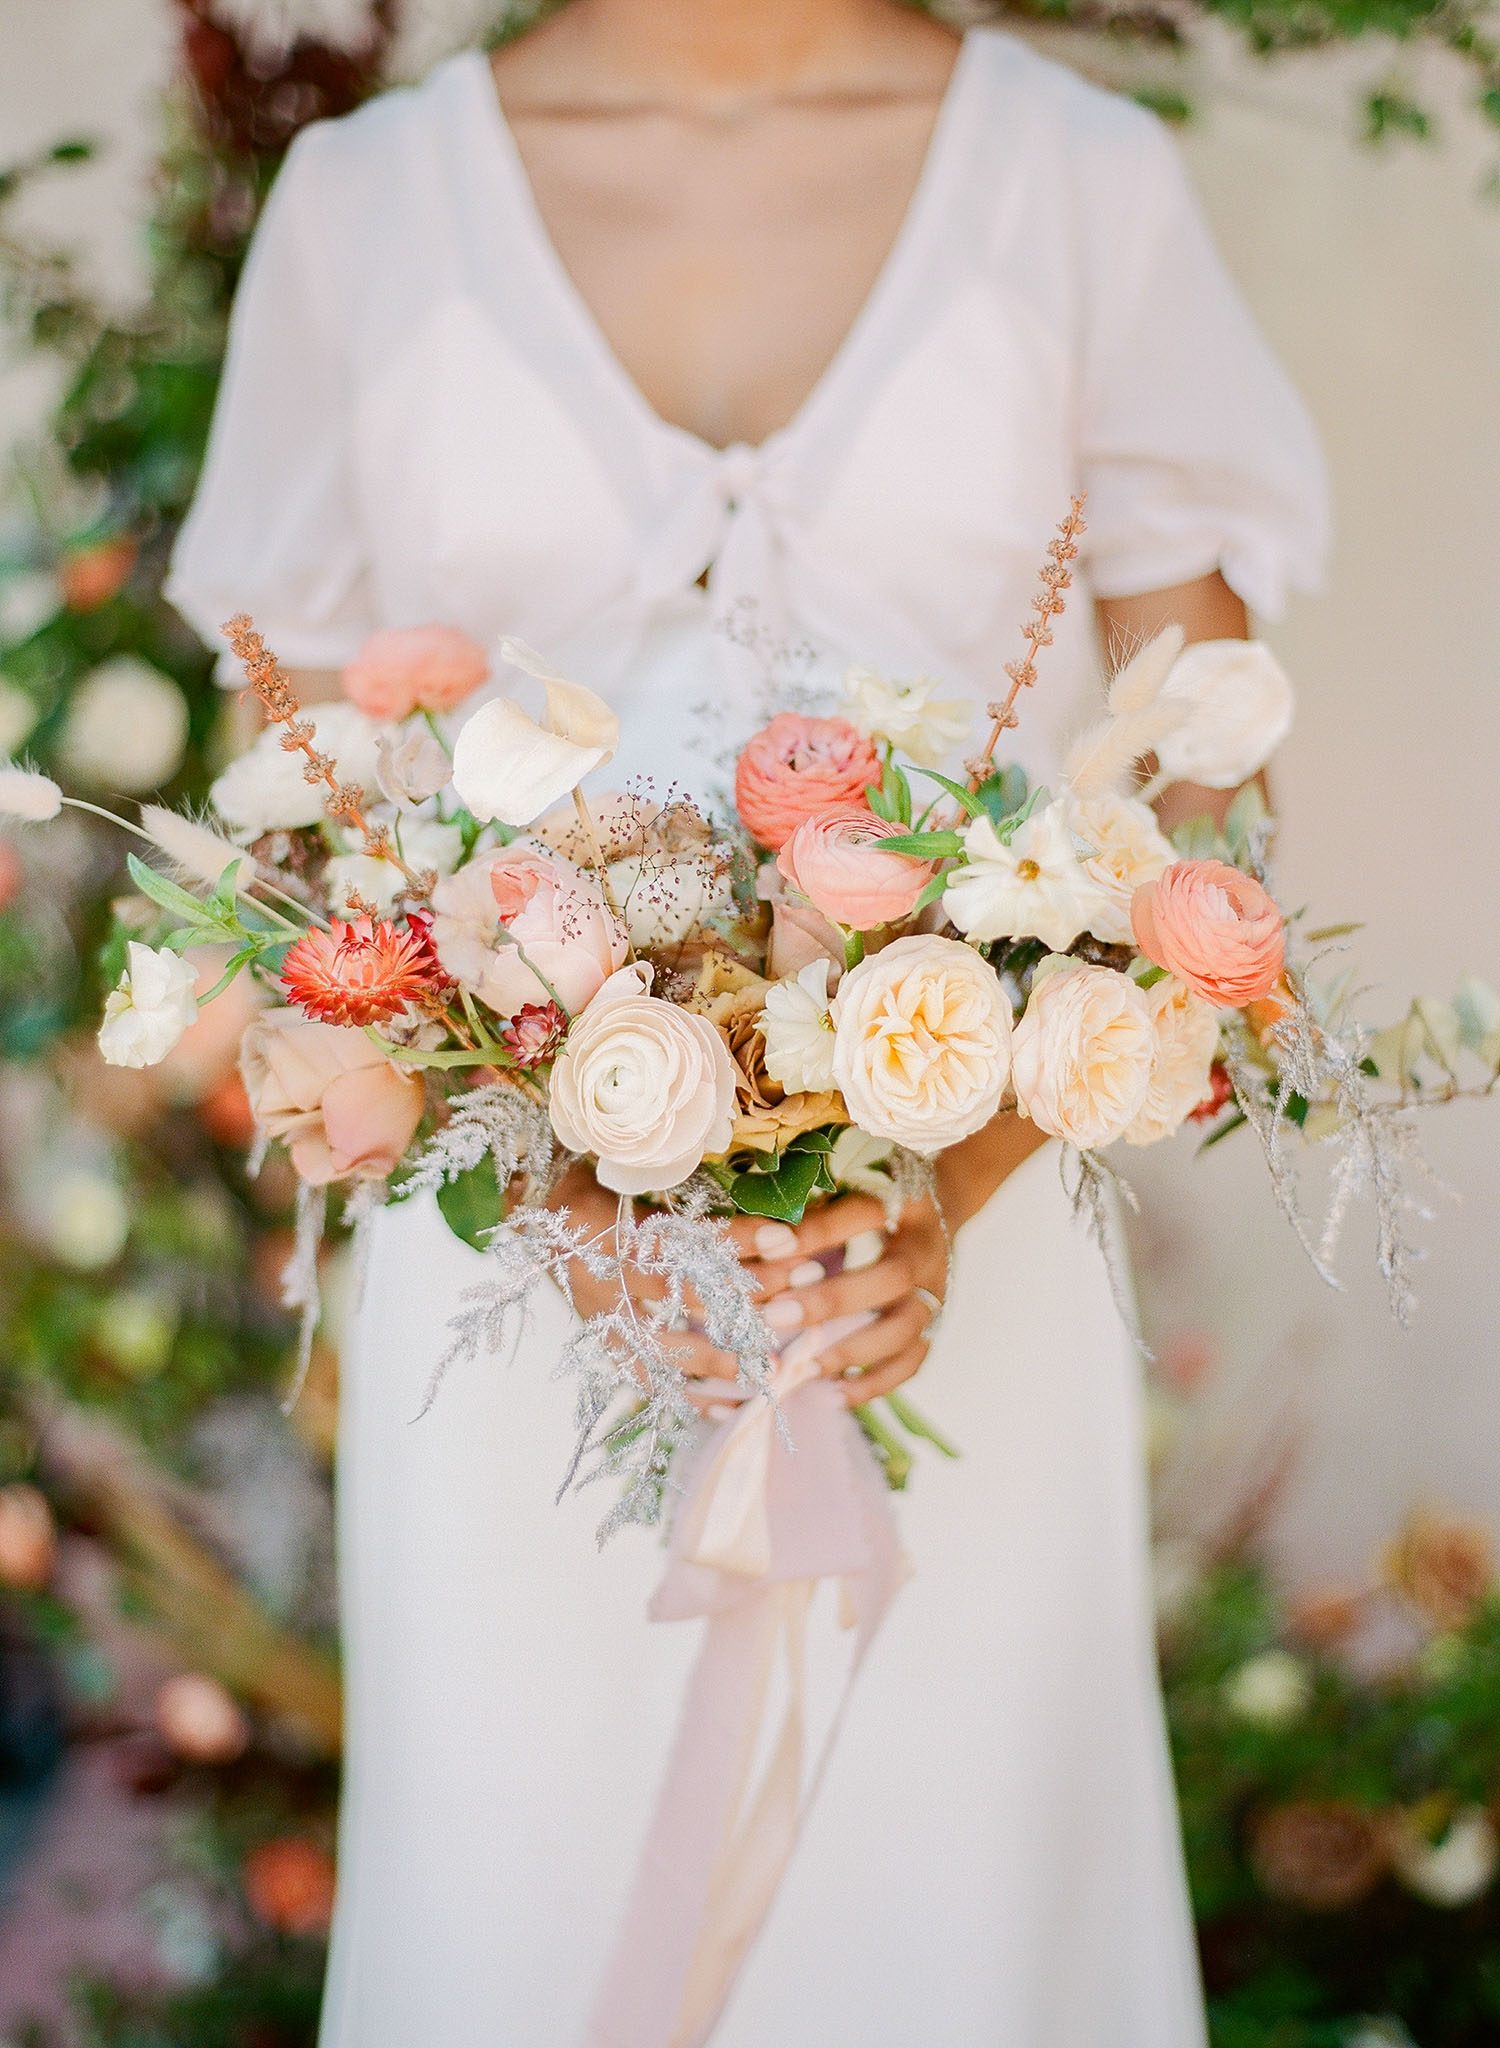 Peach and coral bridal bouquet with trailing silk ribbon from a midsummer wedding designed by Willow & Oak Events, captured by Charleston wedding photographer, Clay Austin